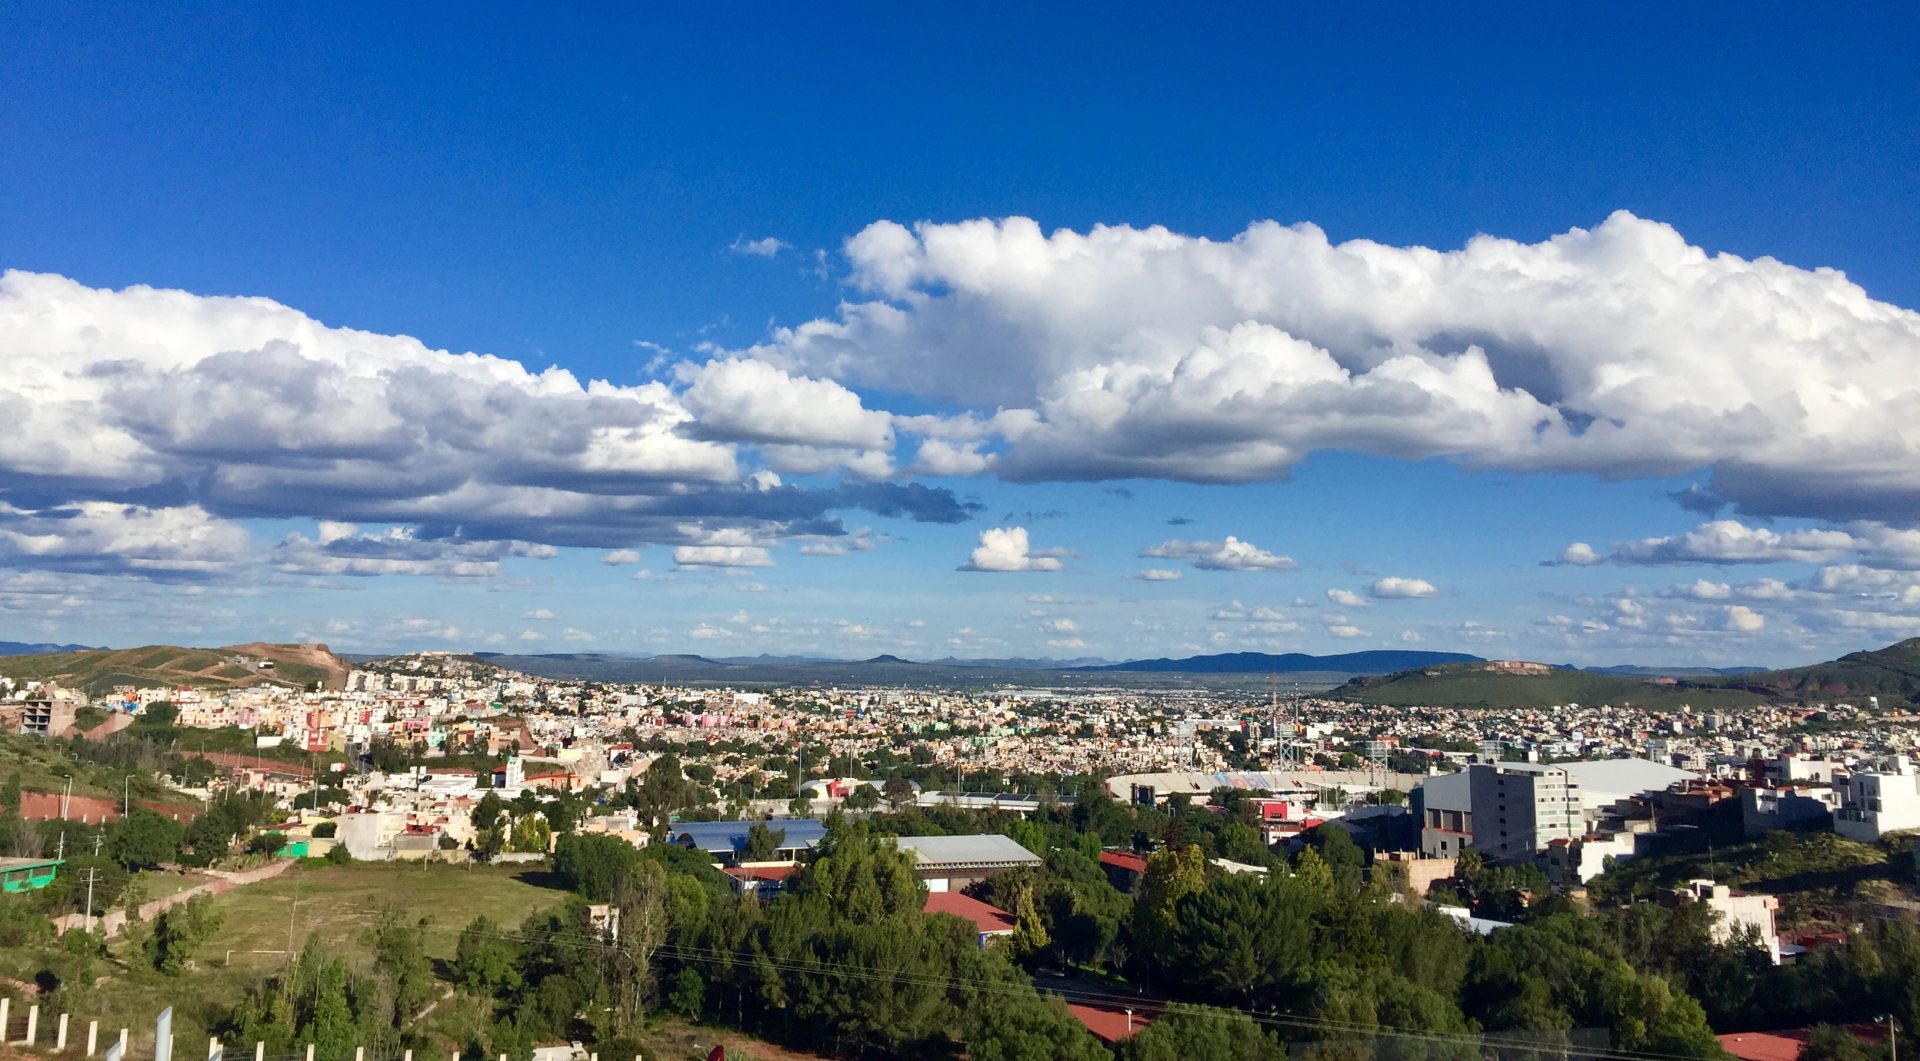 The State of Zacatecas – Part 3 (Sept 11 to 15)